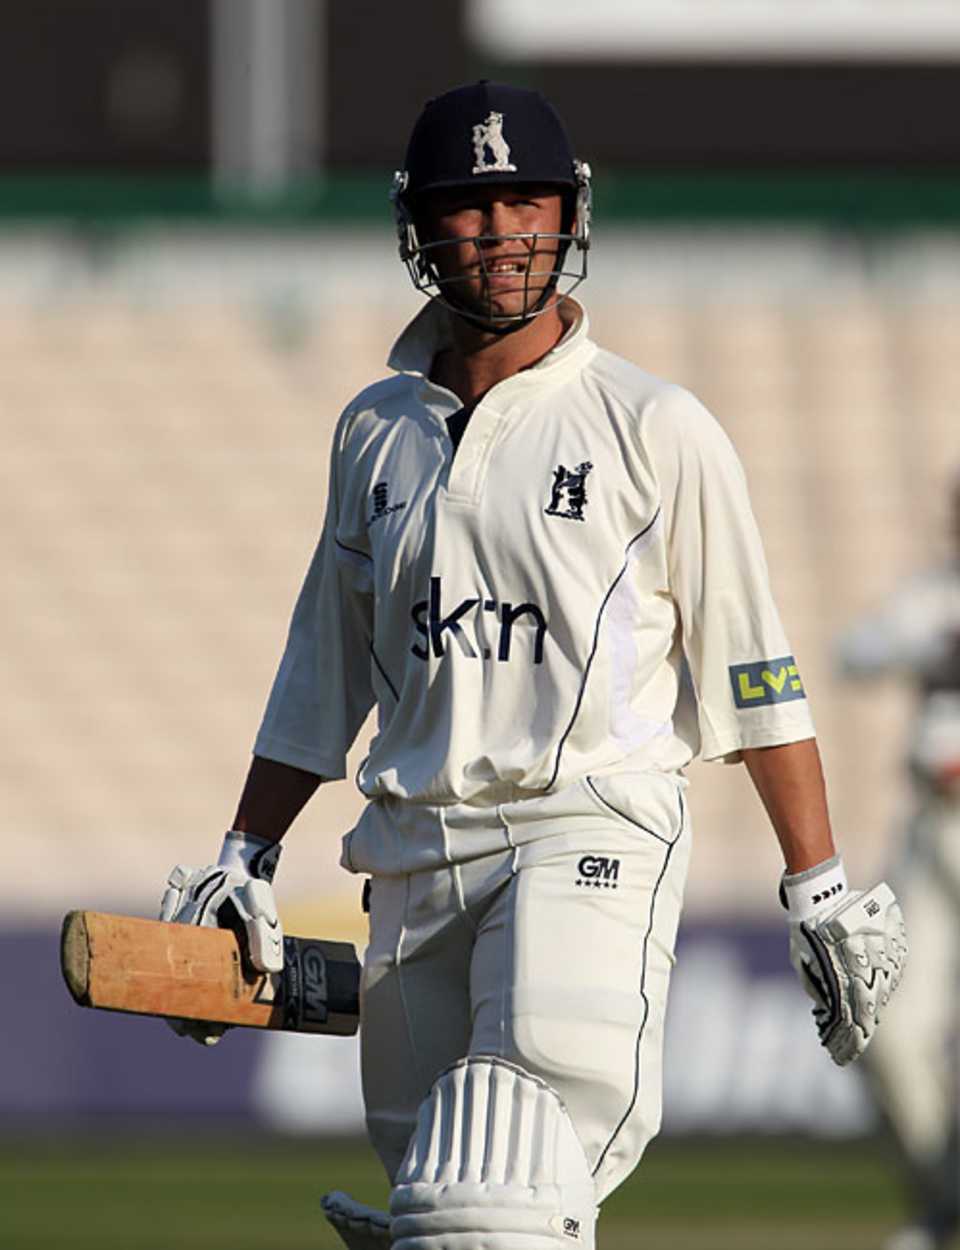 Jonathan Trott failed for the second time, falling lbw to Tom Smith for six